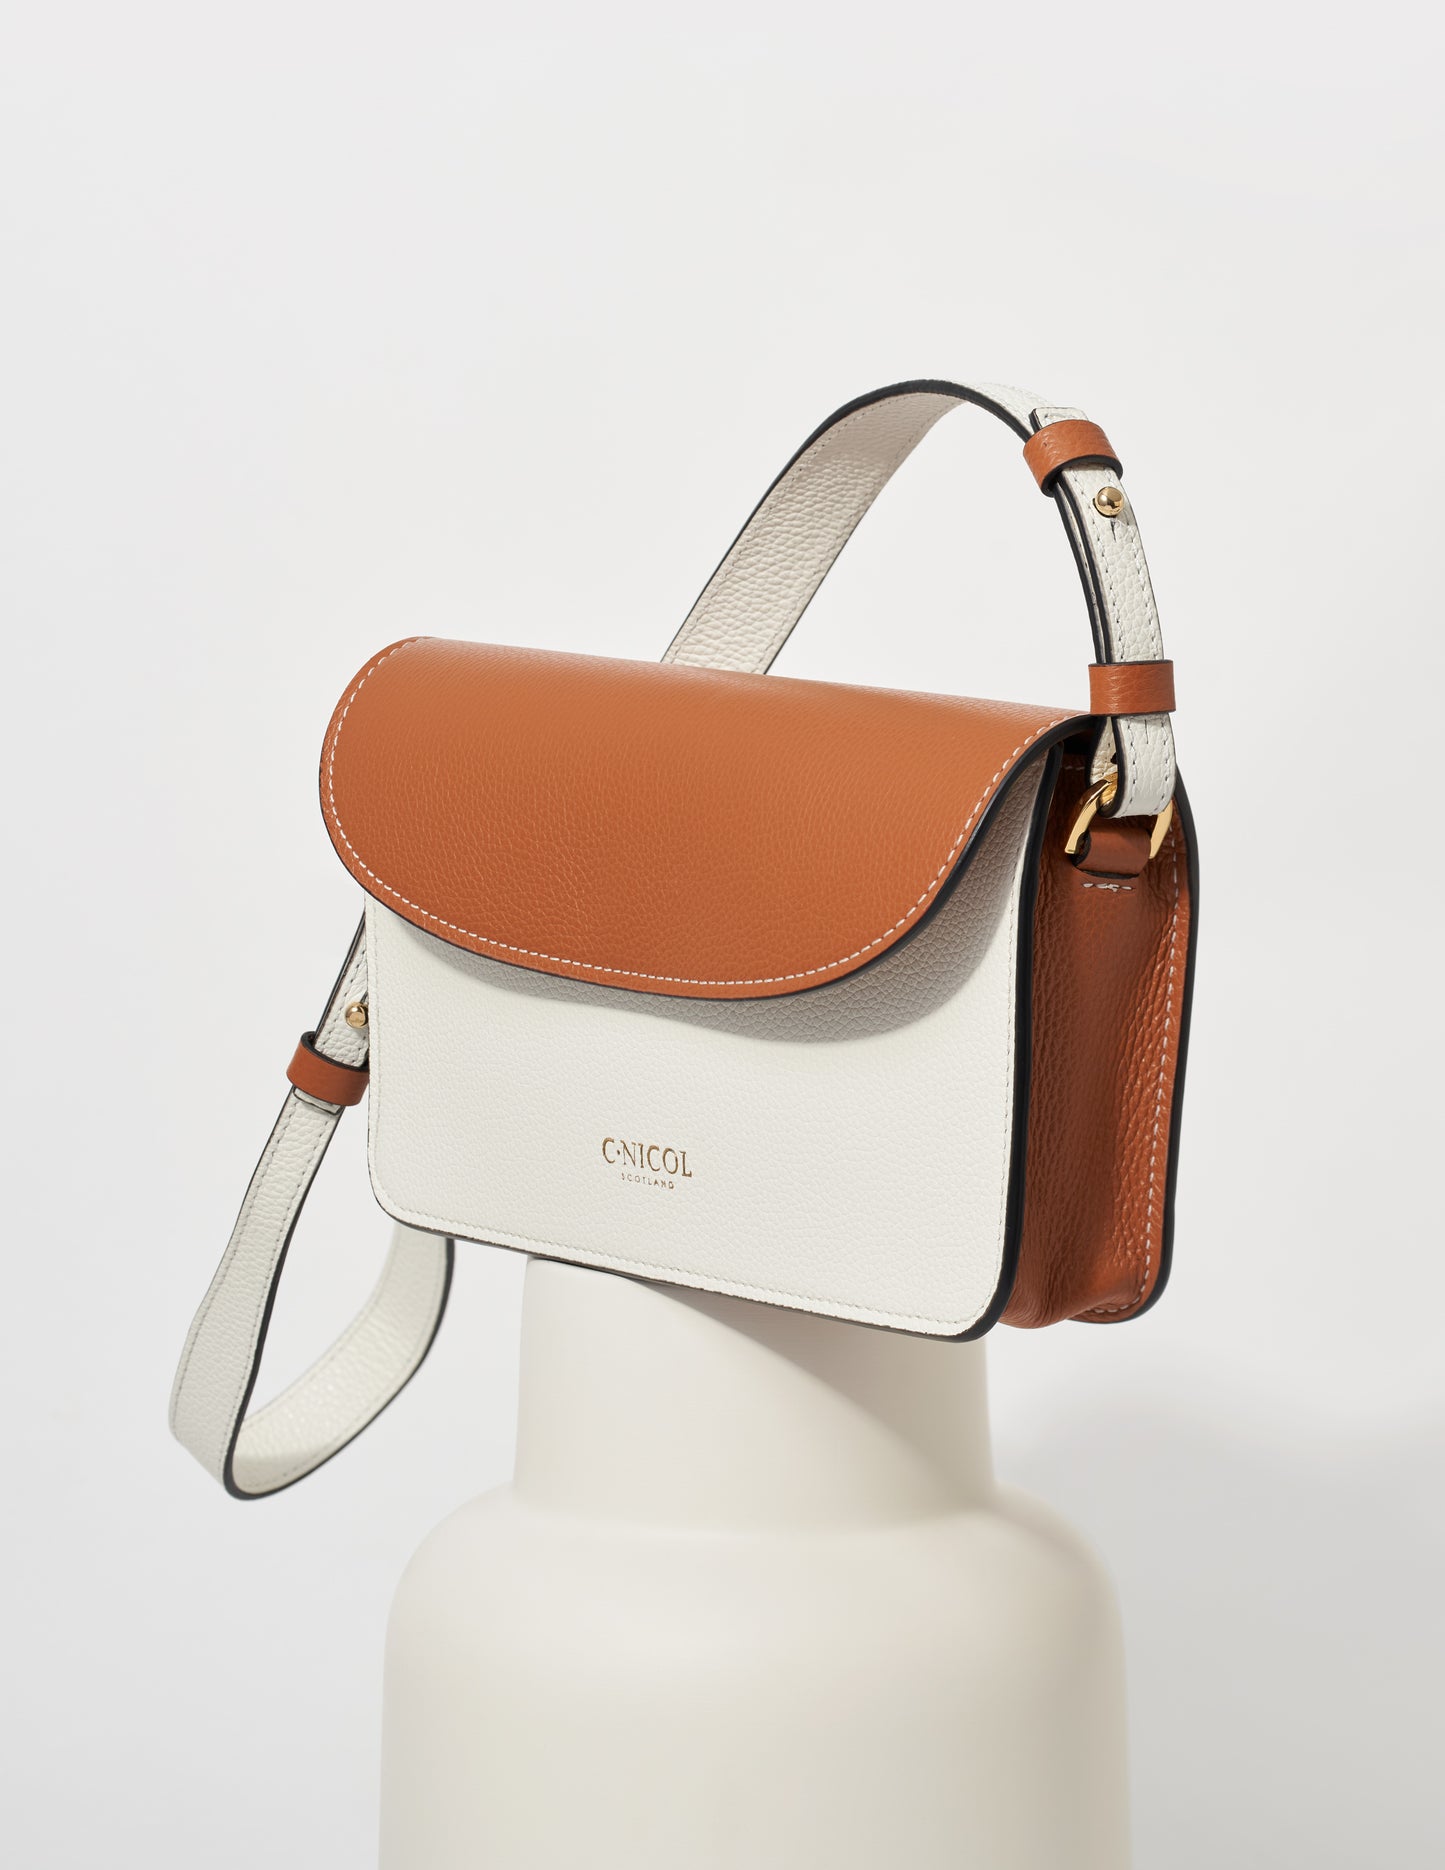 CNicol White and Tan Leather Kate Bag on White Base